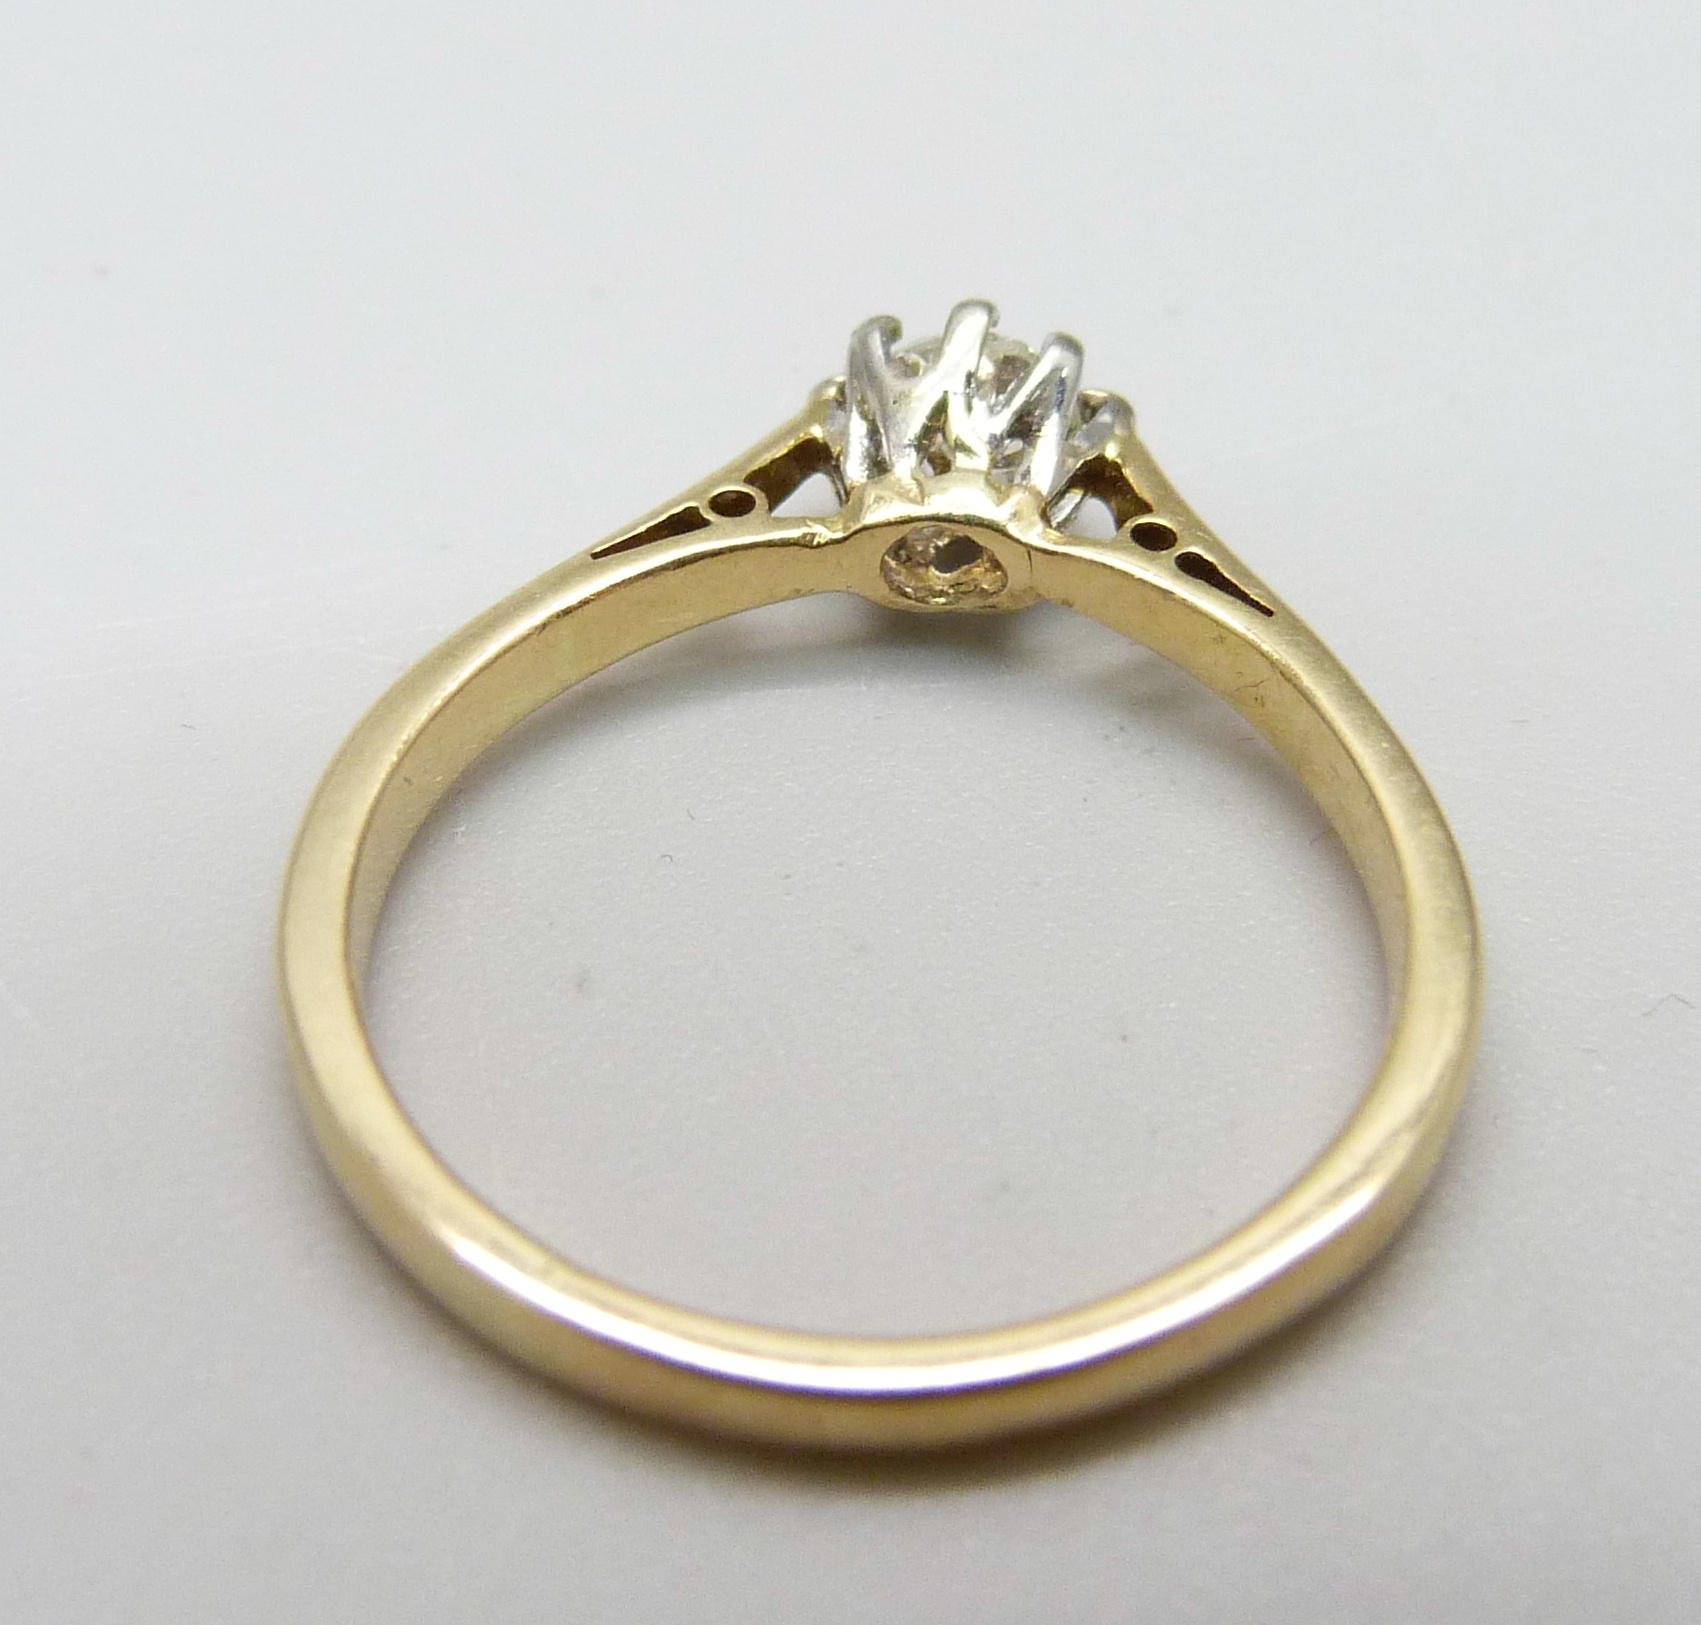 An 18ct gold and diamond solitaire ring, 2.3g, L, over 0.25ct diamond weight - Image 3 of 3